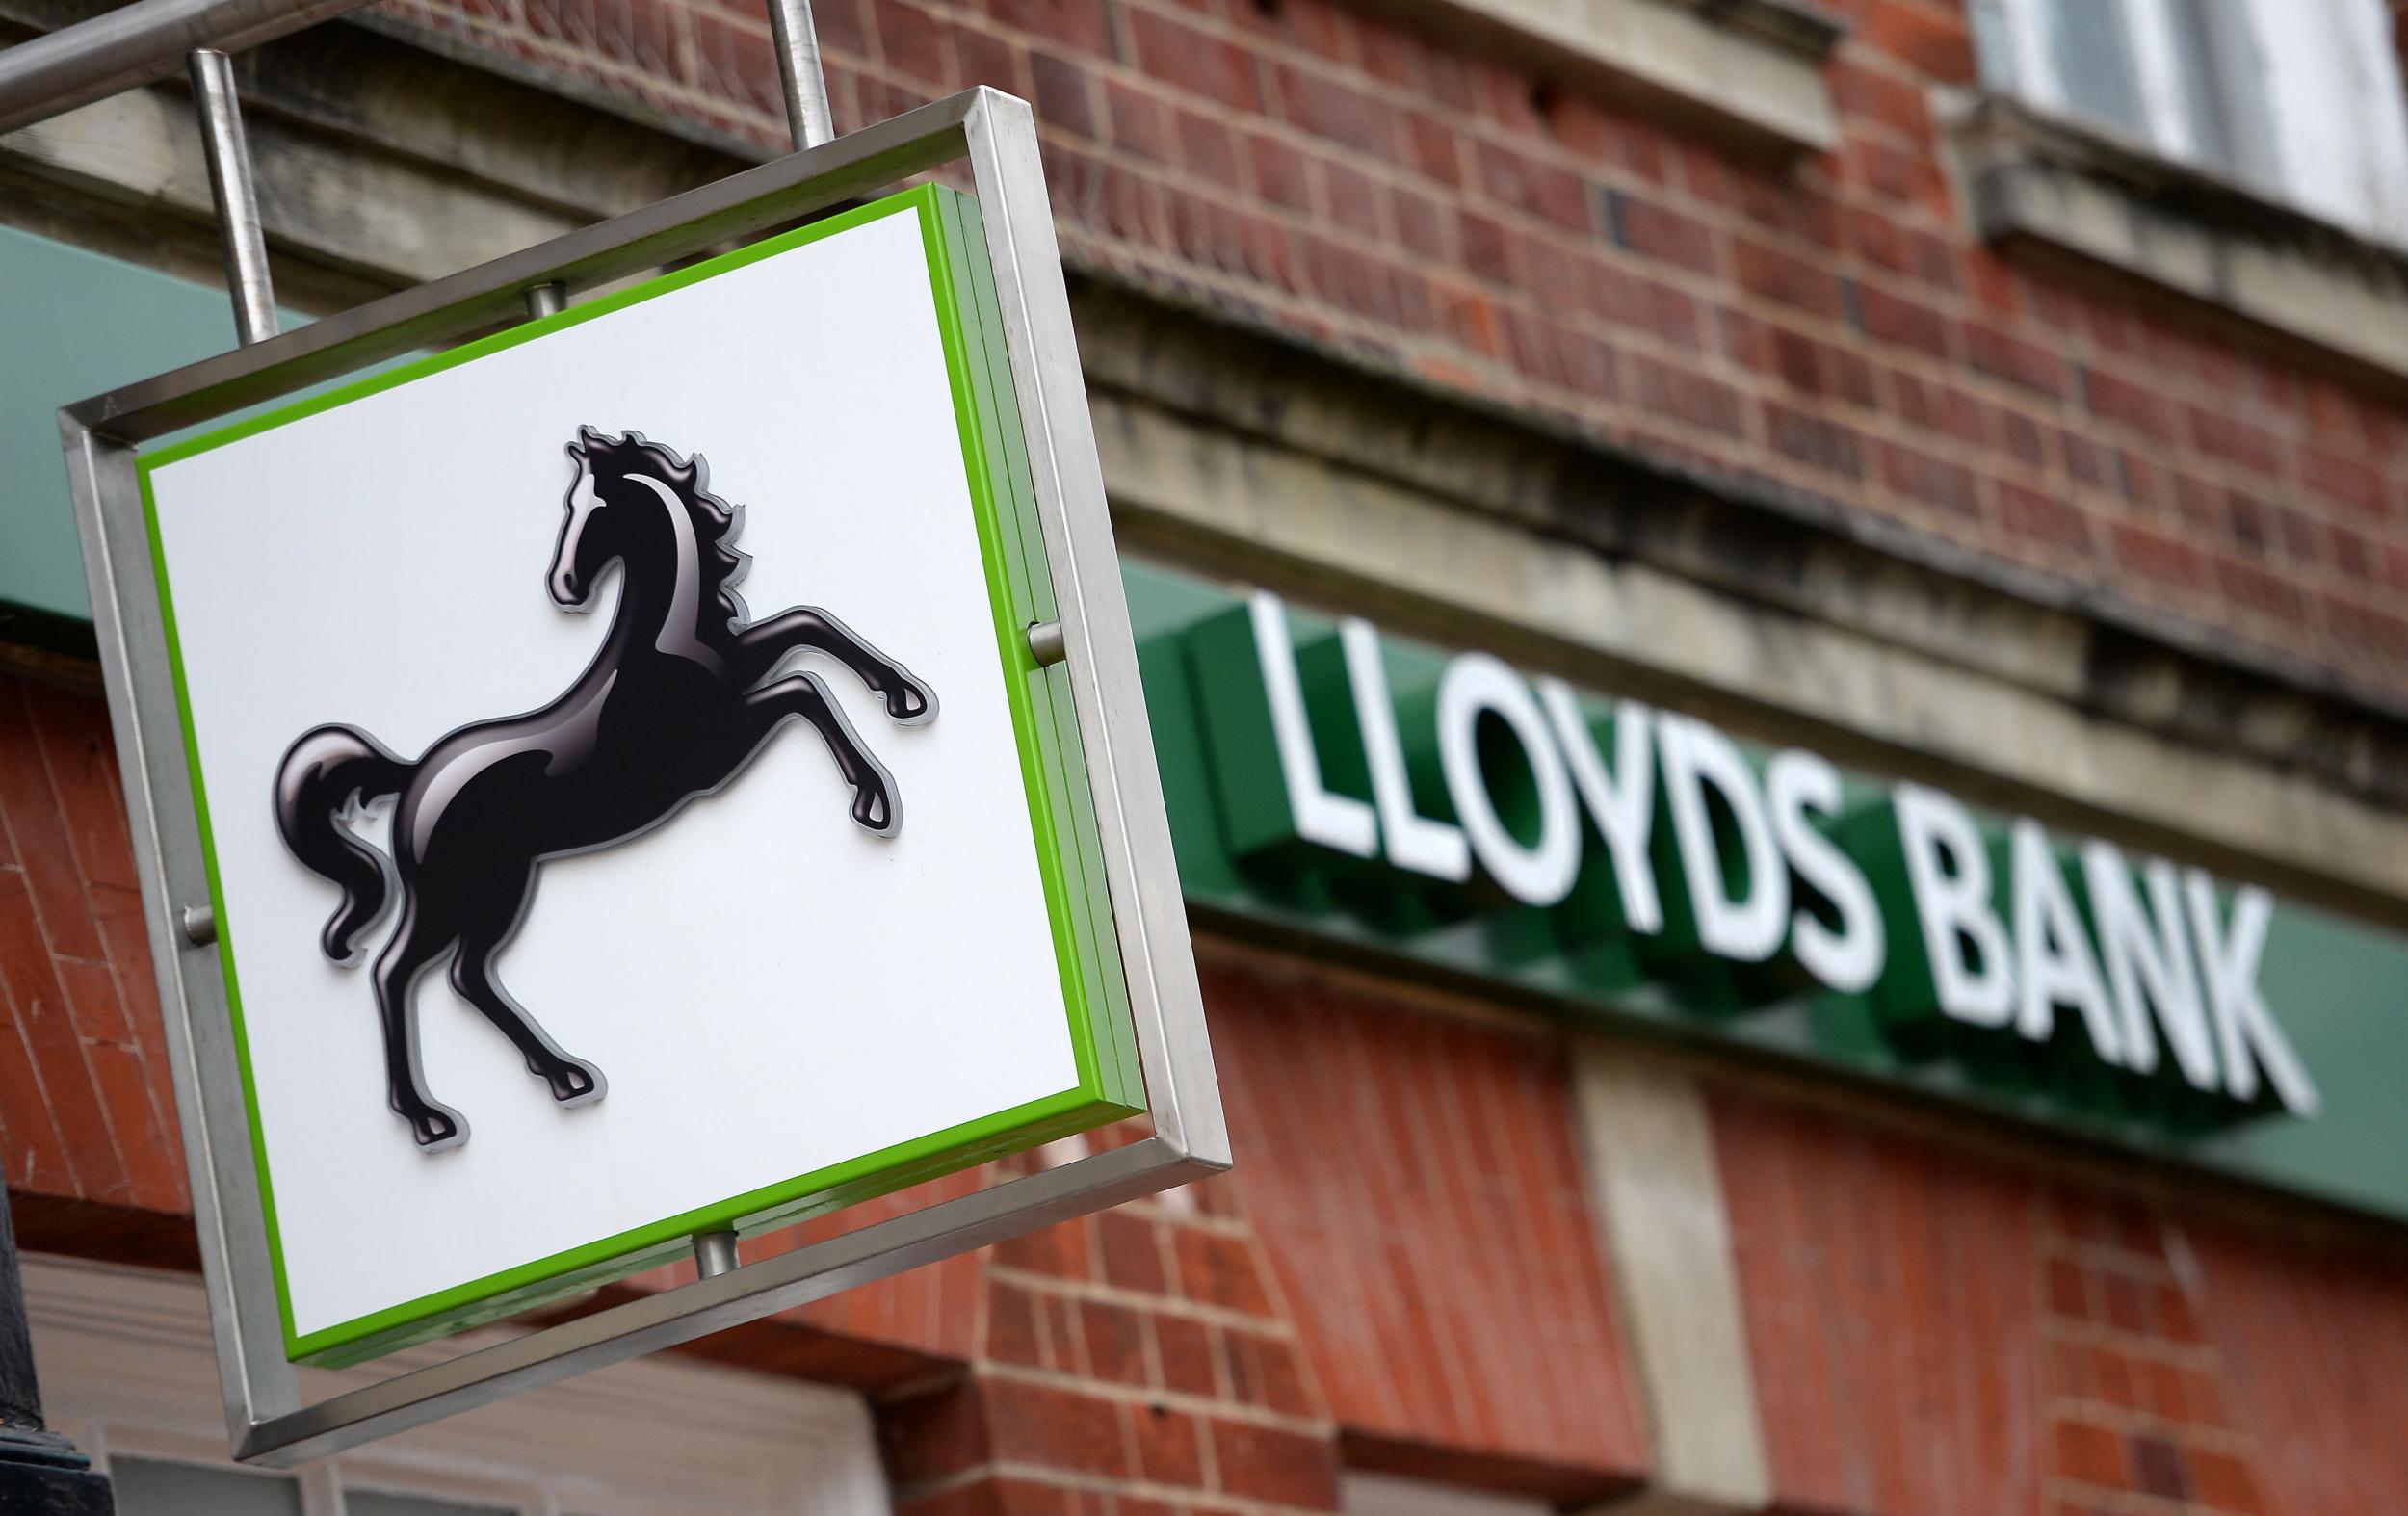 Lloyds: One of the banks that has moved on unauthorised overdraft charges